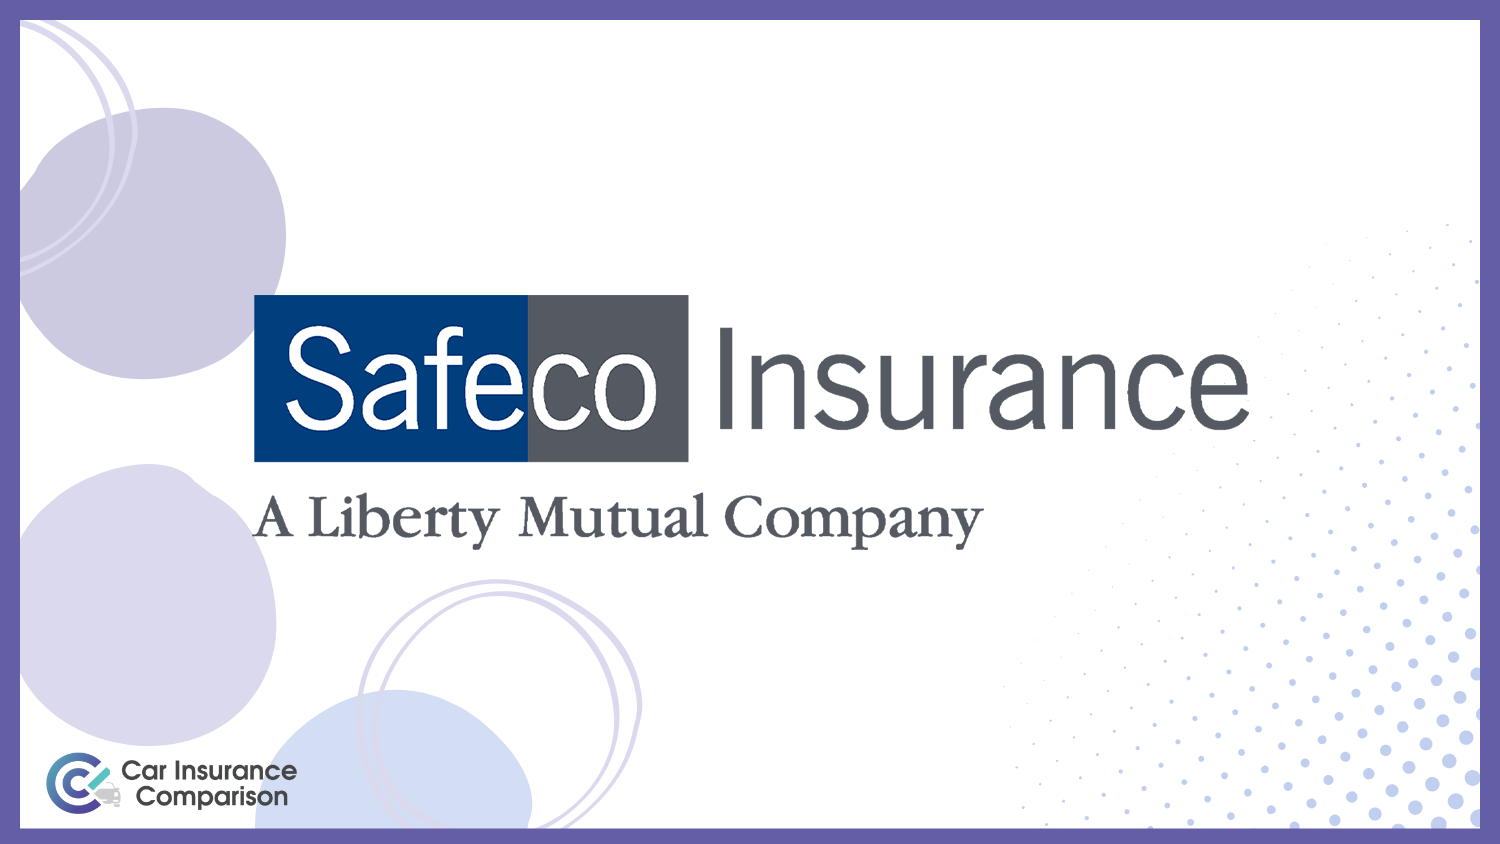 Safeco: Cheap Classic Car Insurance Without a Garage